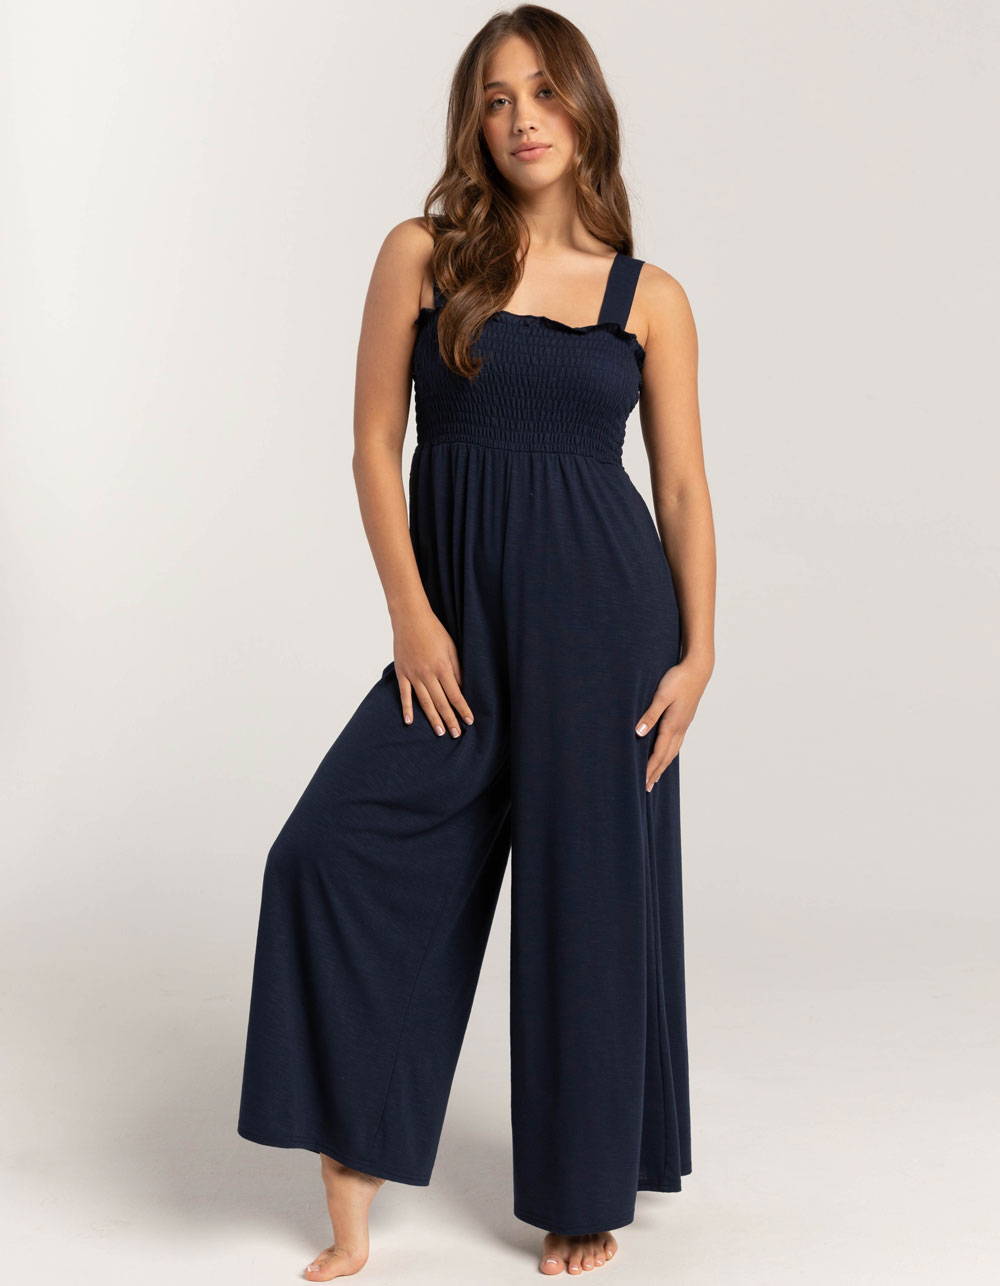 ROXY Just Passing By Womens Jumpsuit